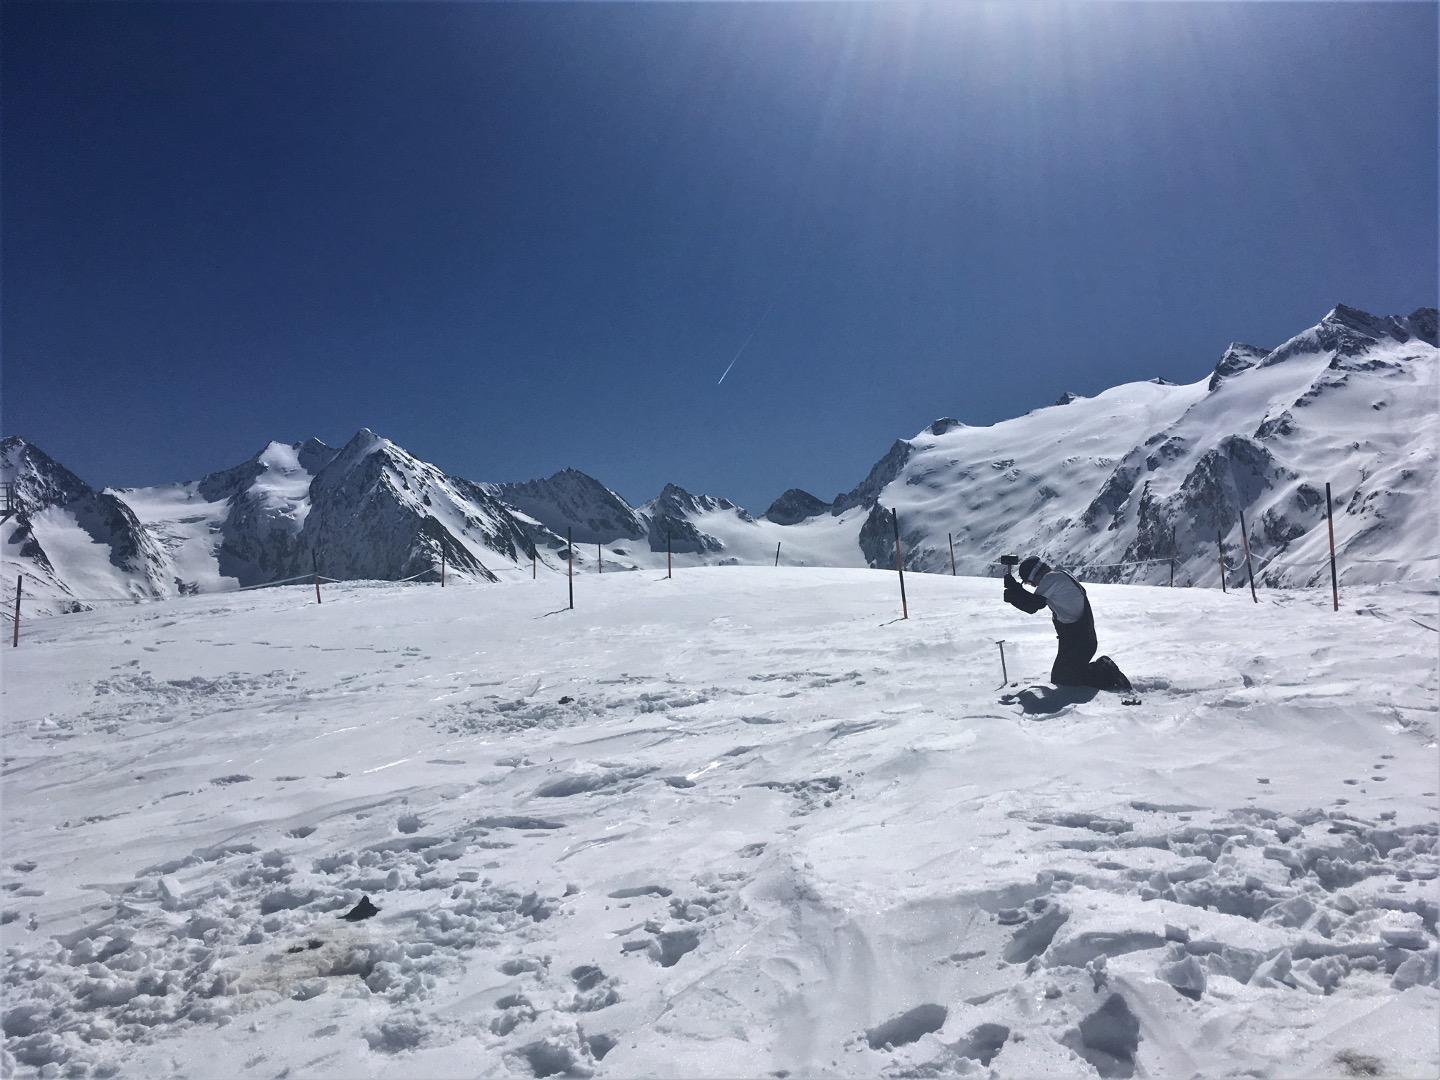 Snow sampling in the Alps. Photo: Helen Snell.